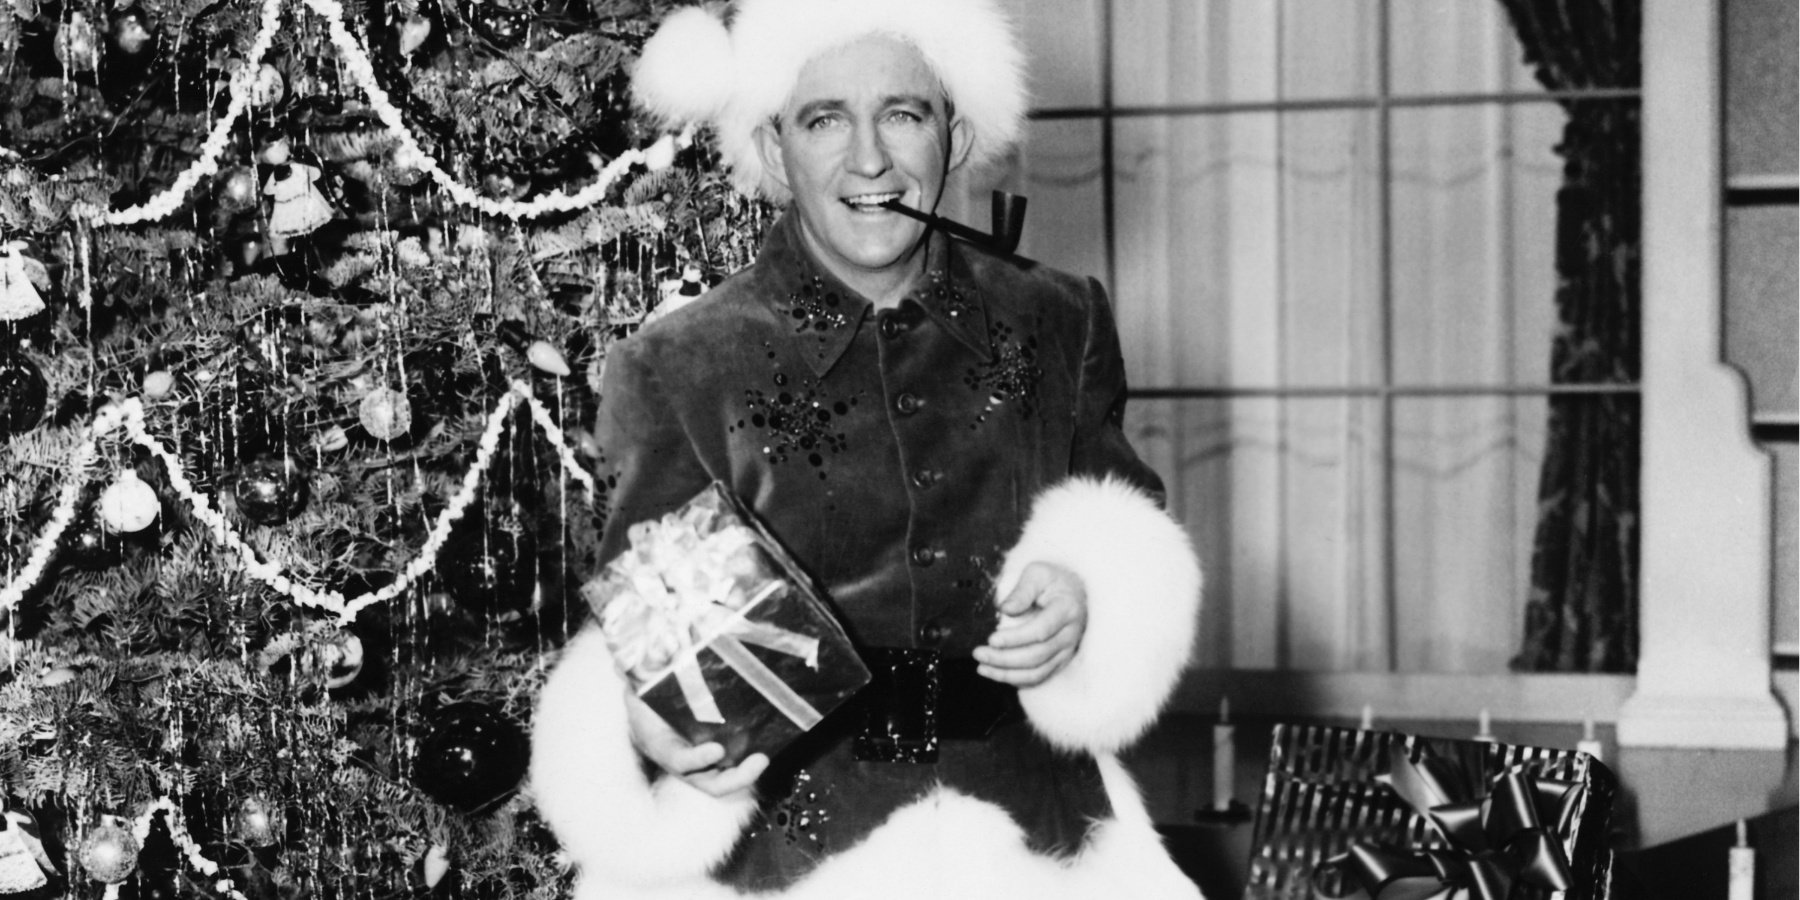 Bing Crosby dressed as Santa Claus in the feature film 'White Christmas' based on the song of the same name.